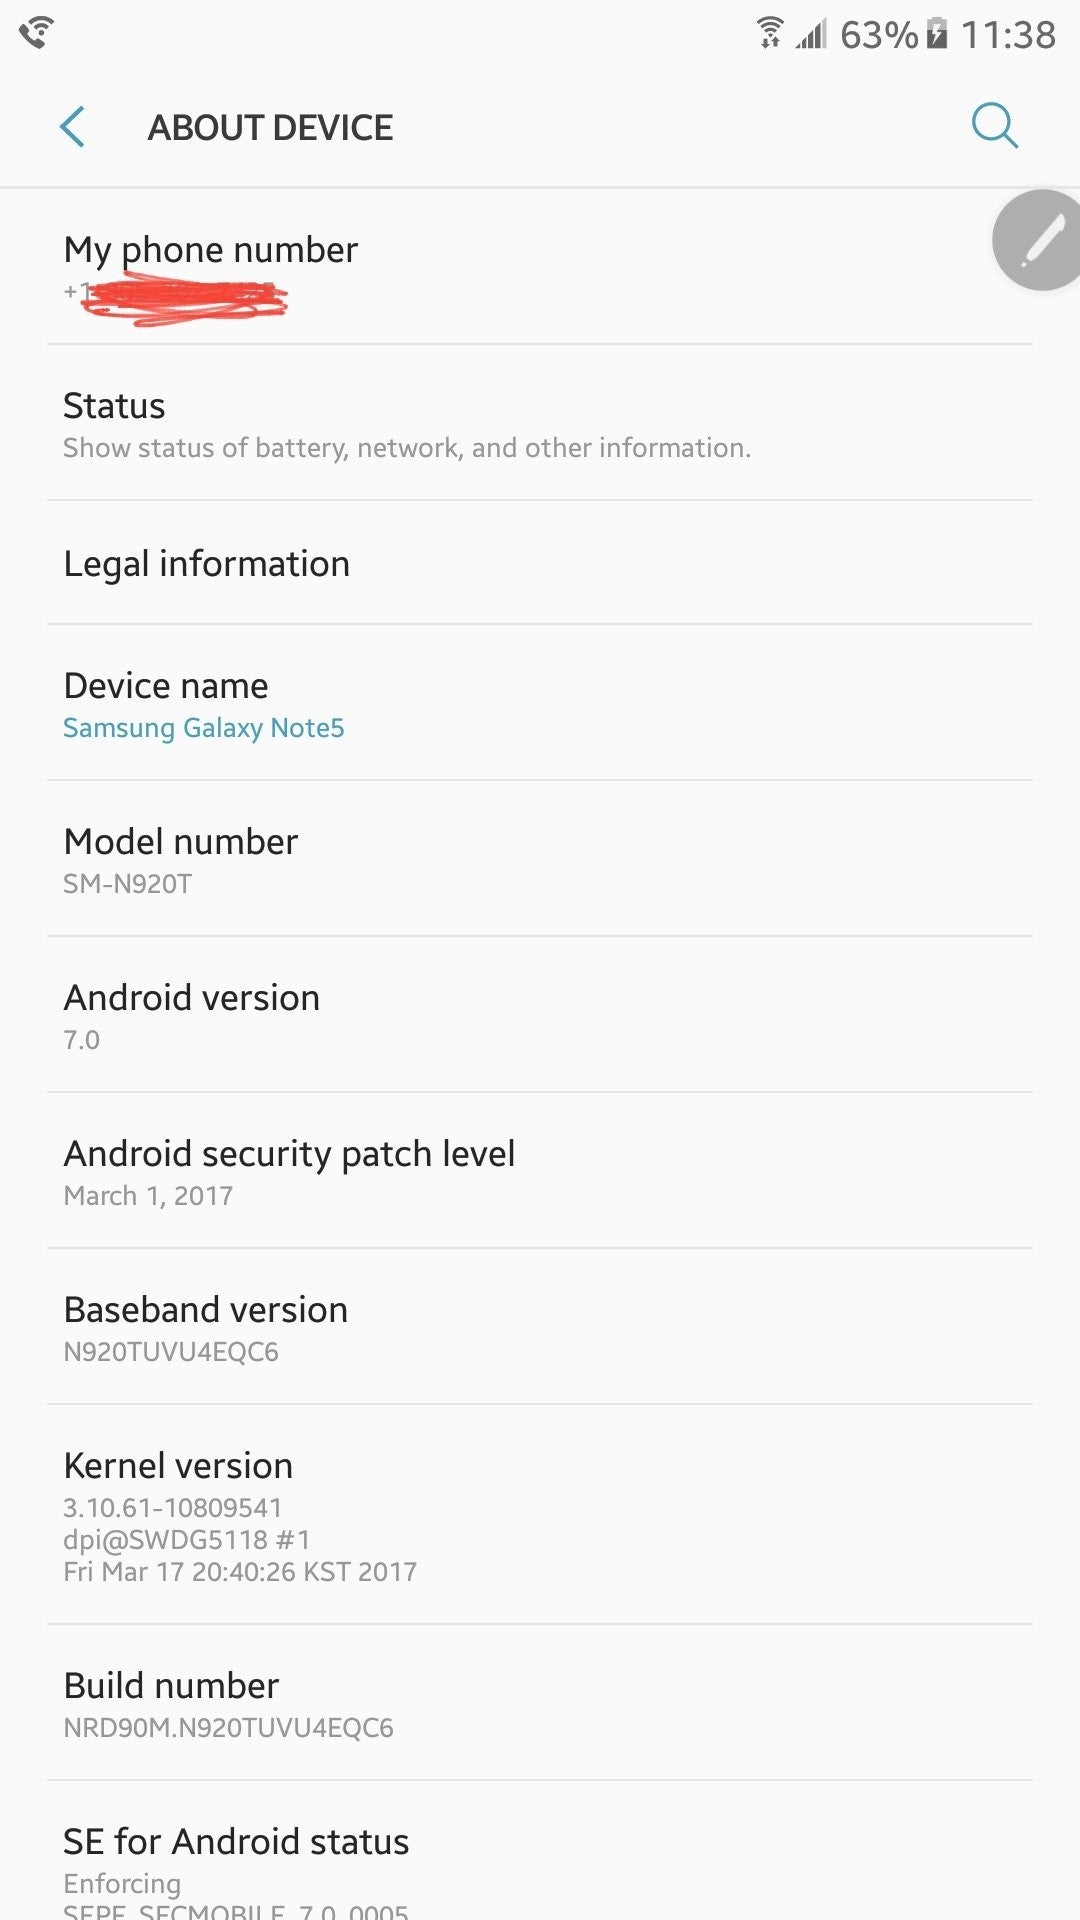 T-Mobile rolls out Android 7.0 Nougat for Samsung Galaxy Note 5